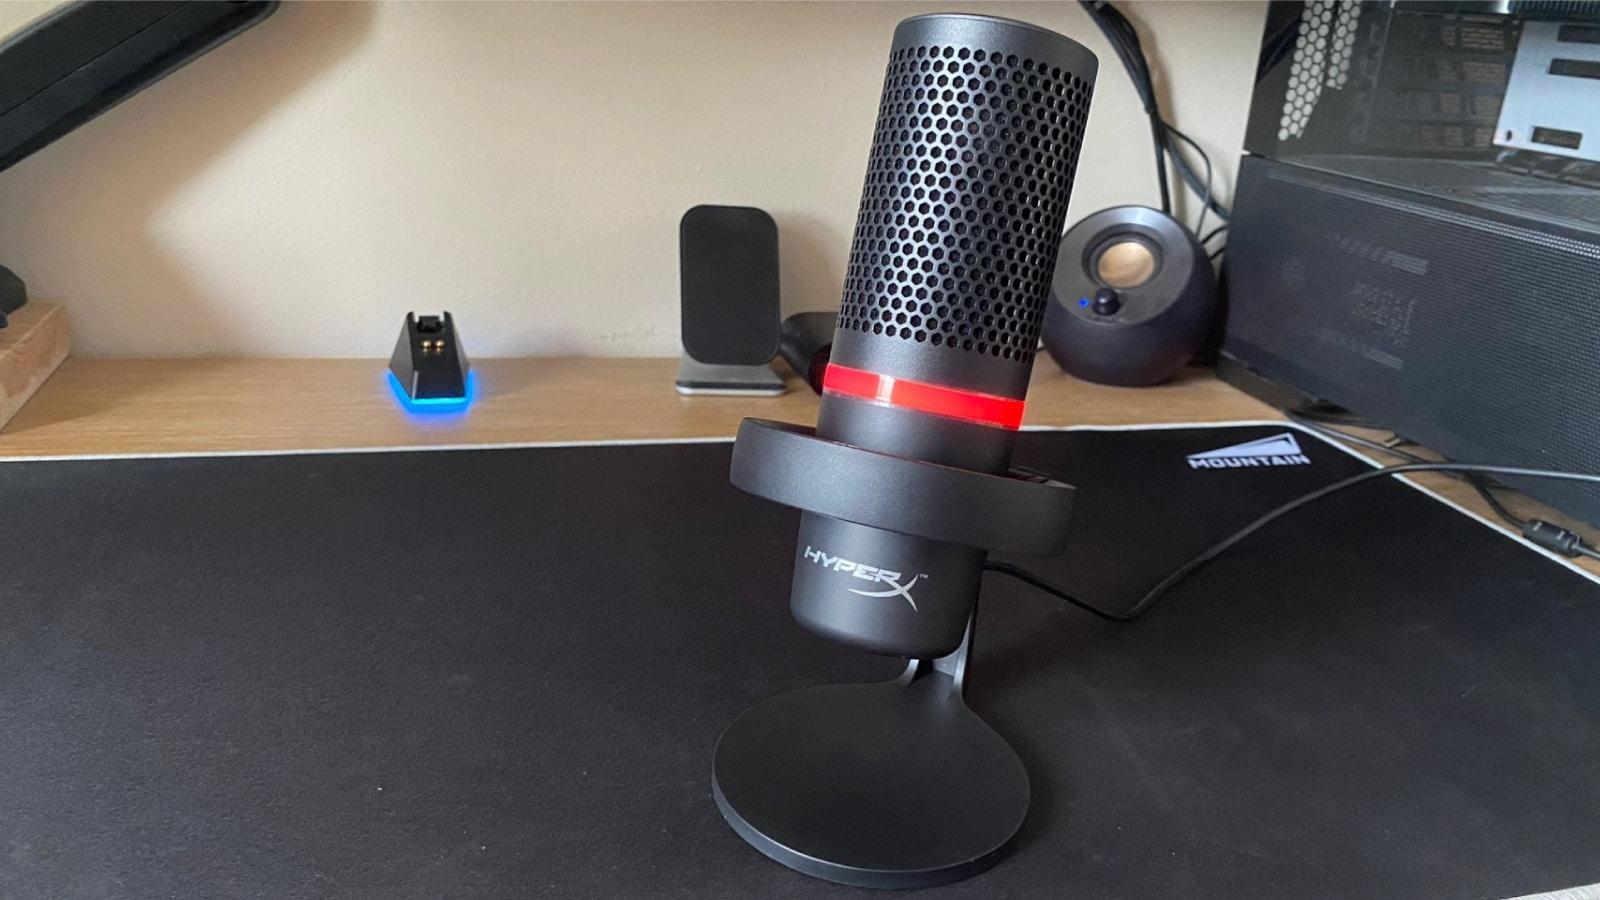 HyperX DuoCast USB Microphone Review